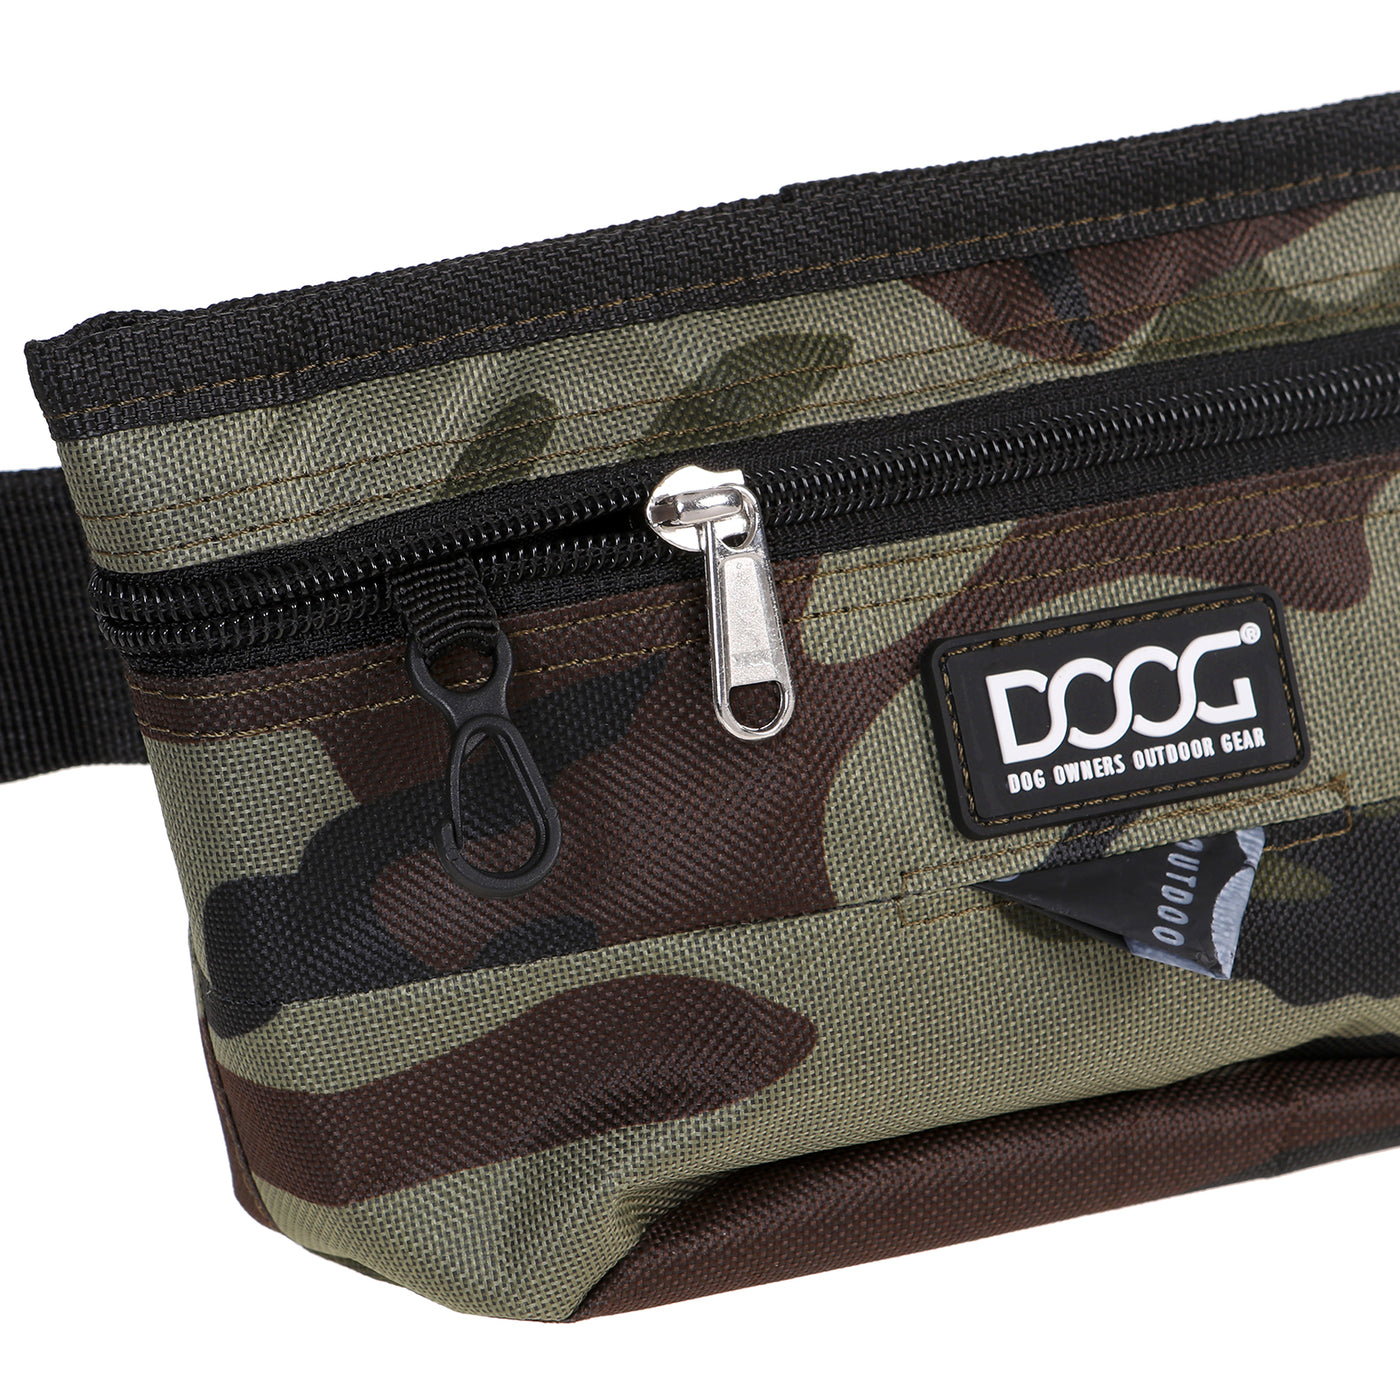 Good Dog Treat Pouch - Camo (Large)